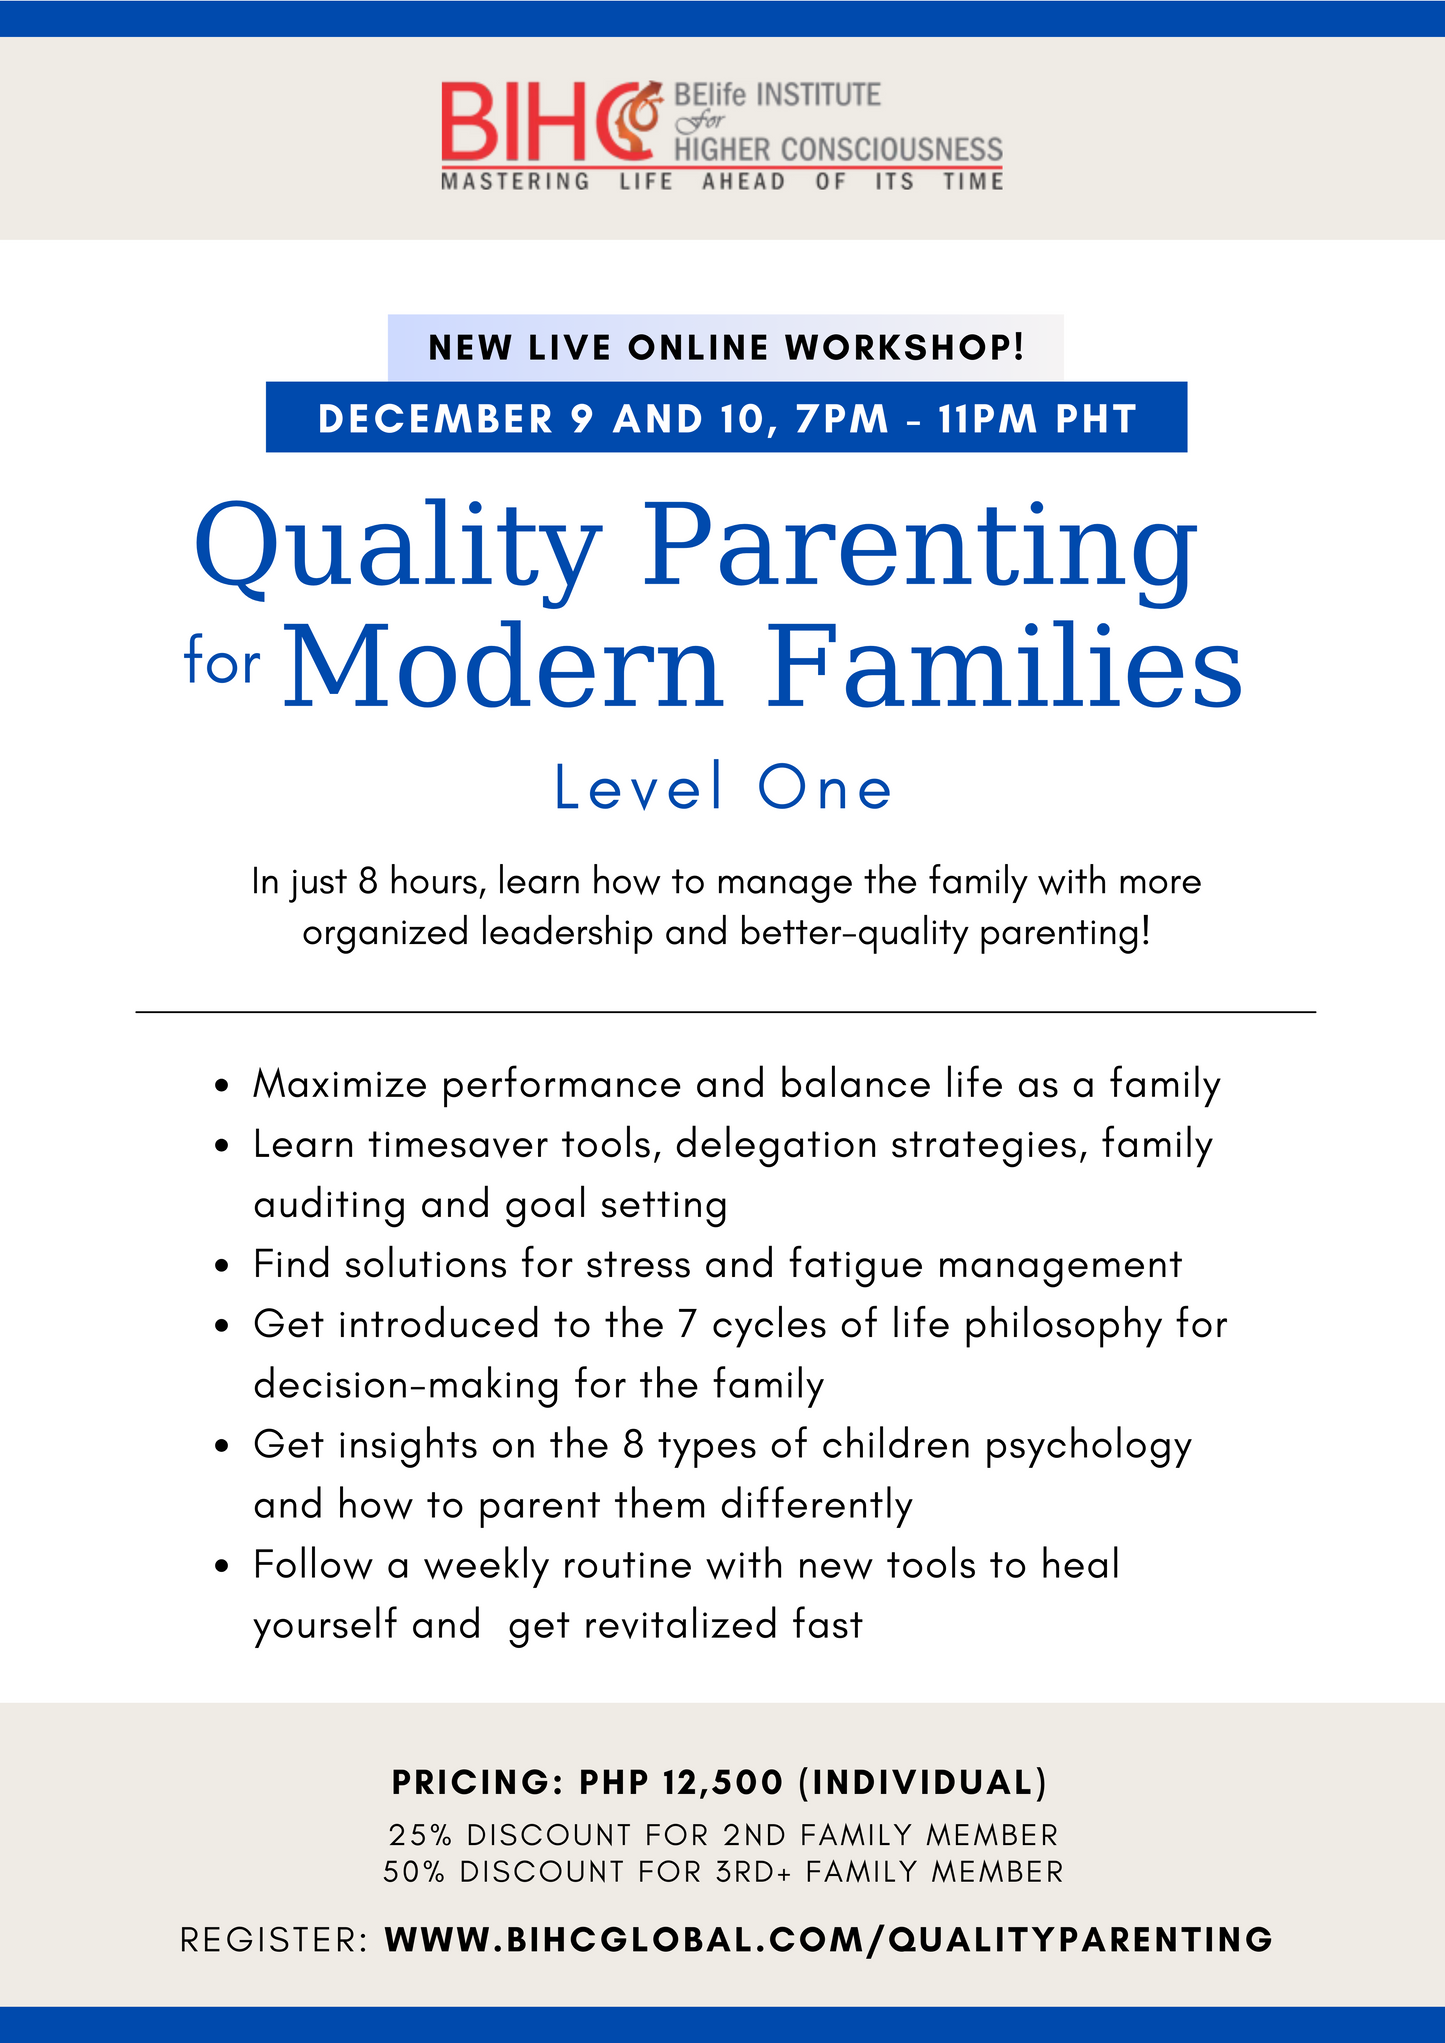 Quality Parenting For Modern Families (Level 1)